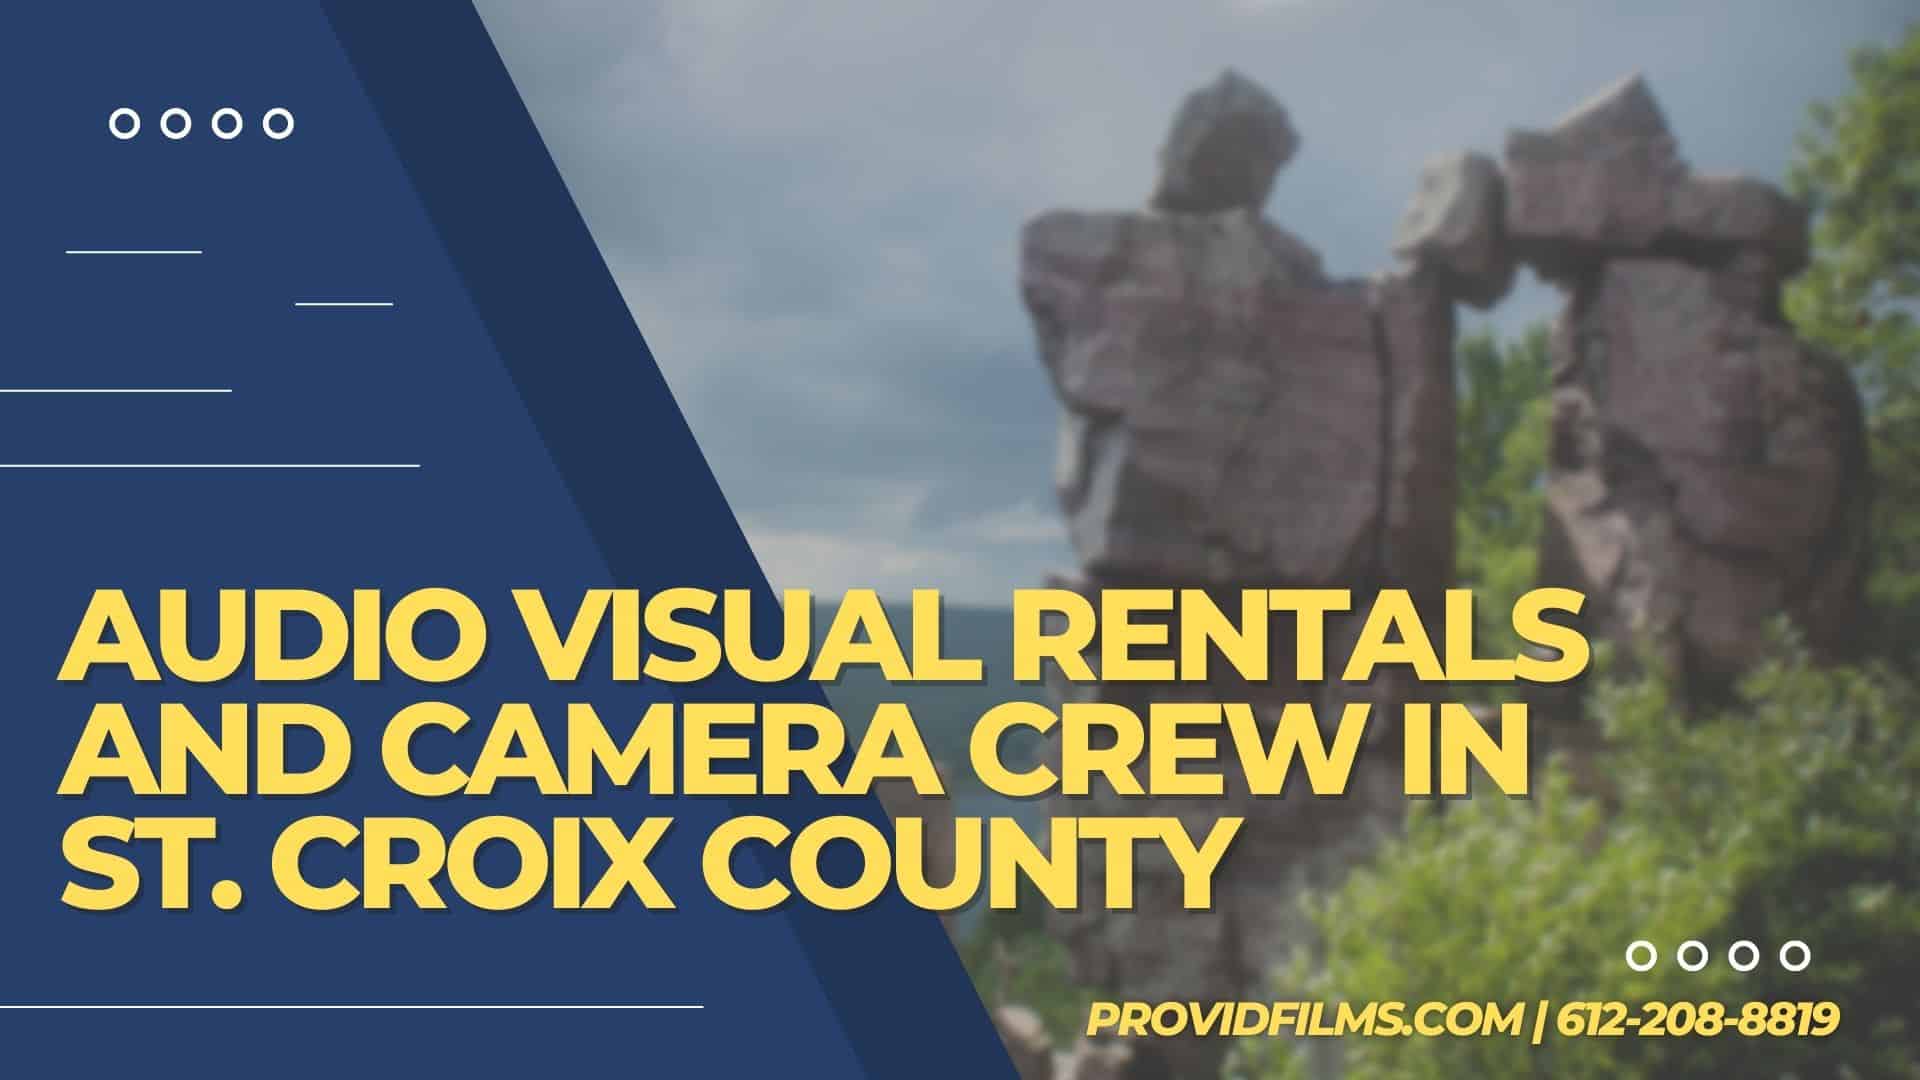 Graphic with a video camera crew with the text saying "AV Rental and Camera Crew in St. Croix County"